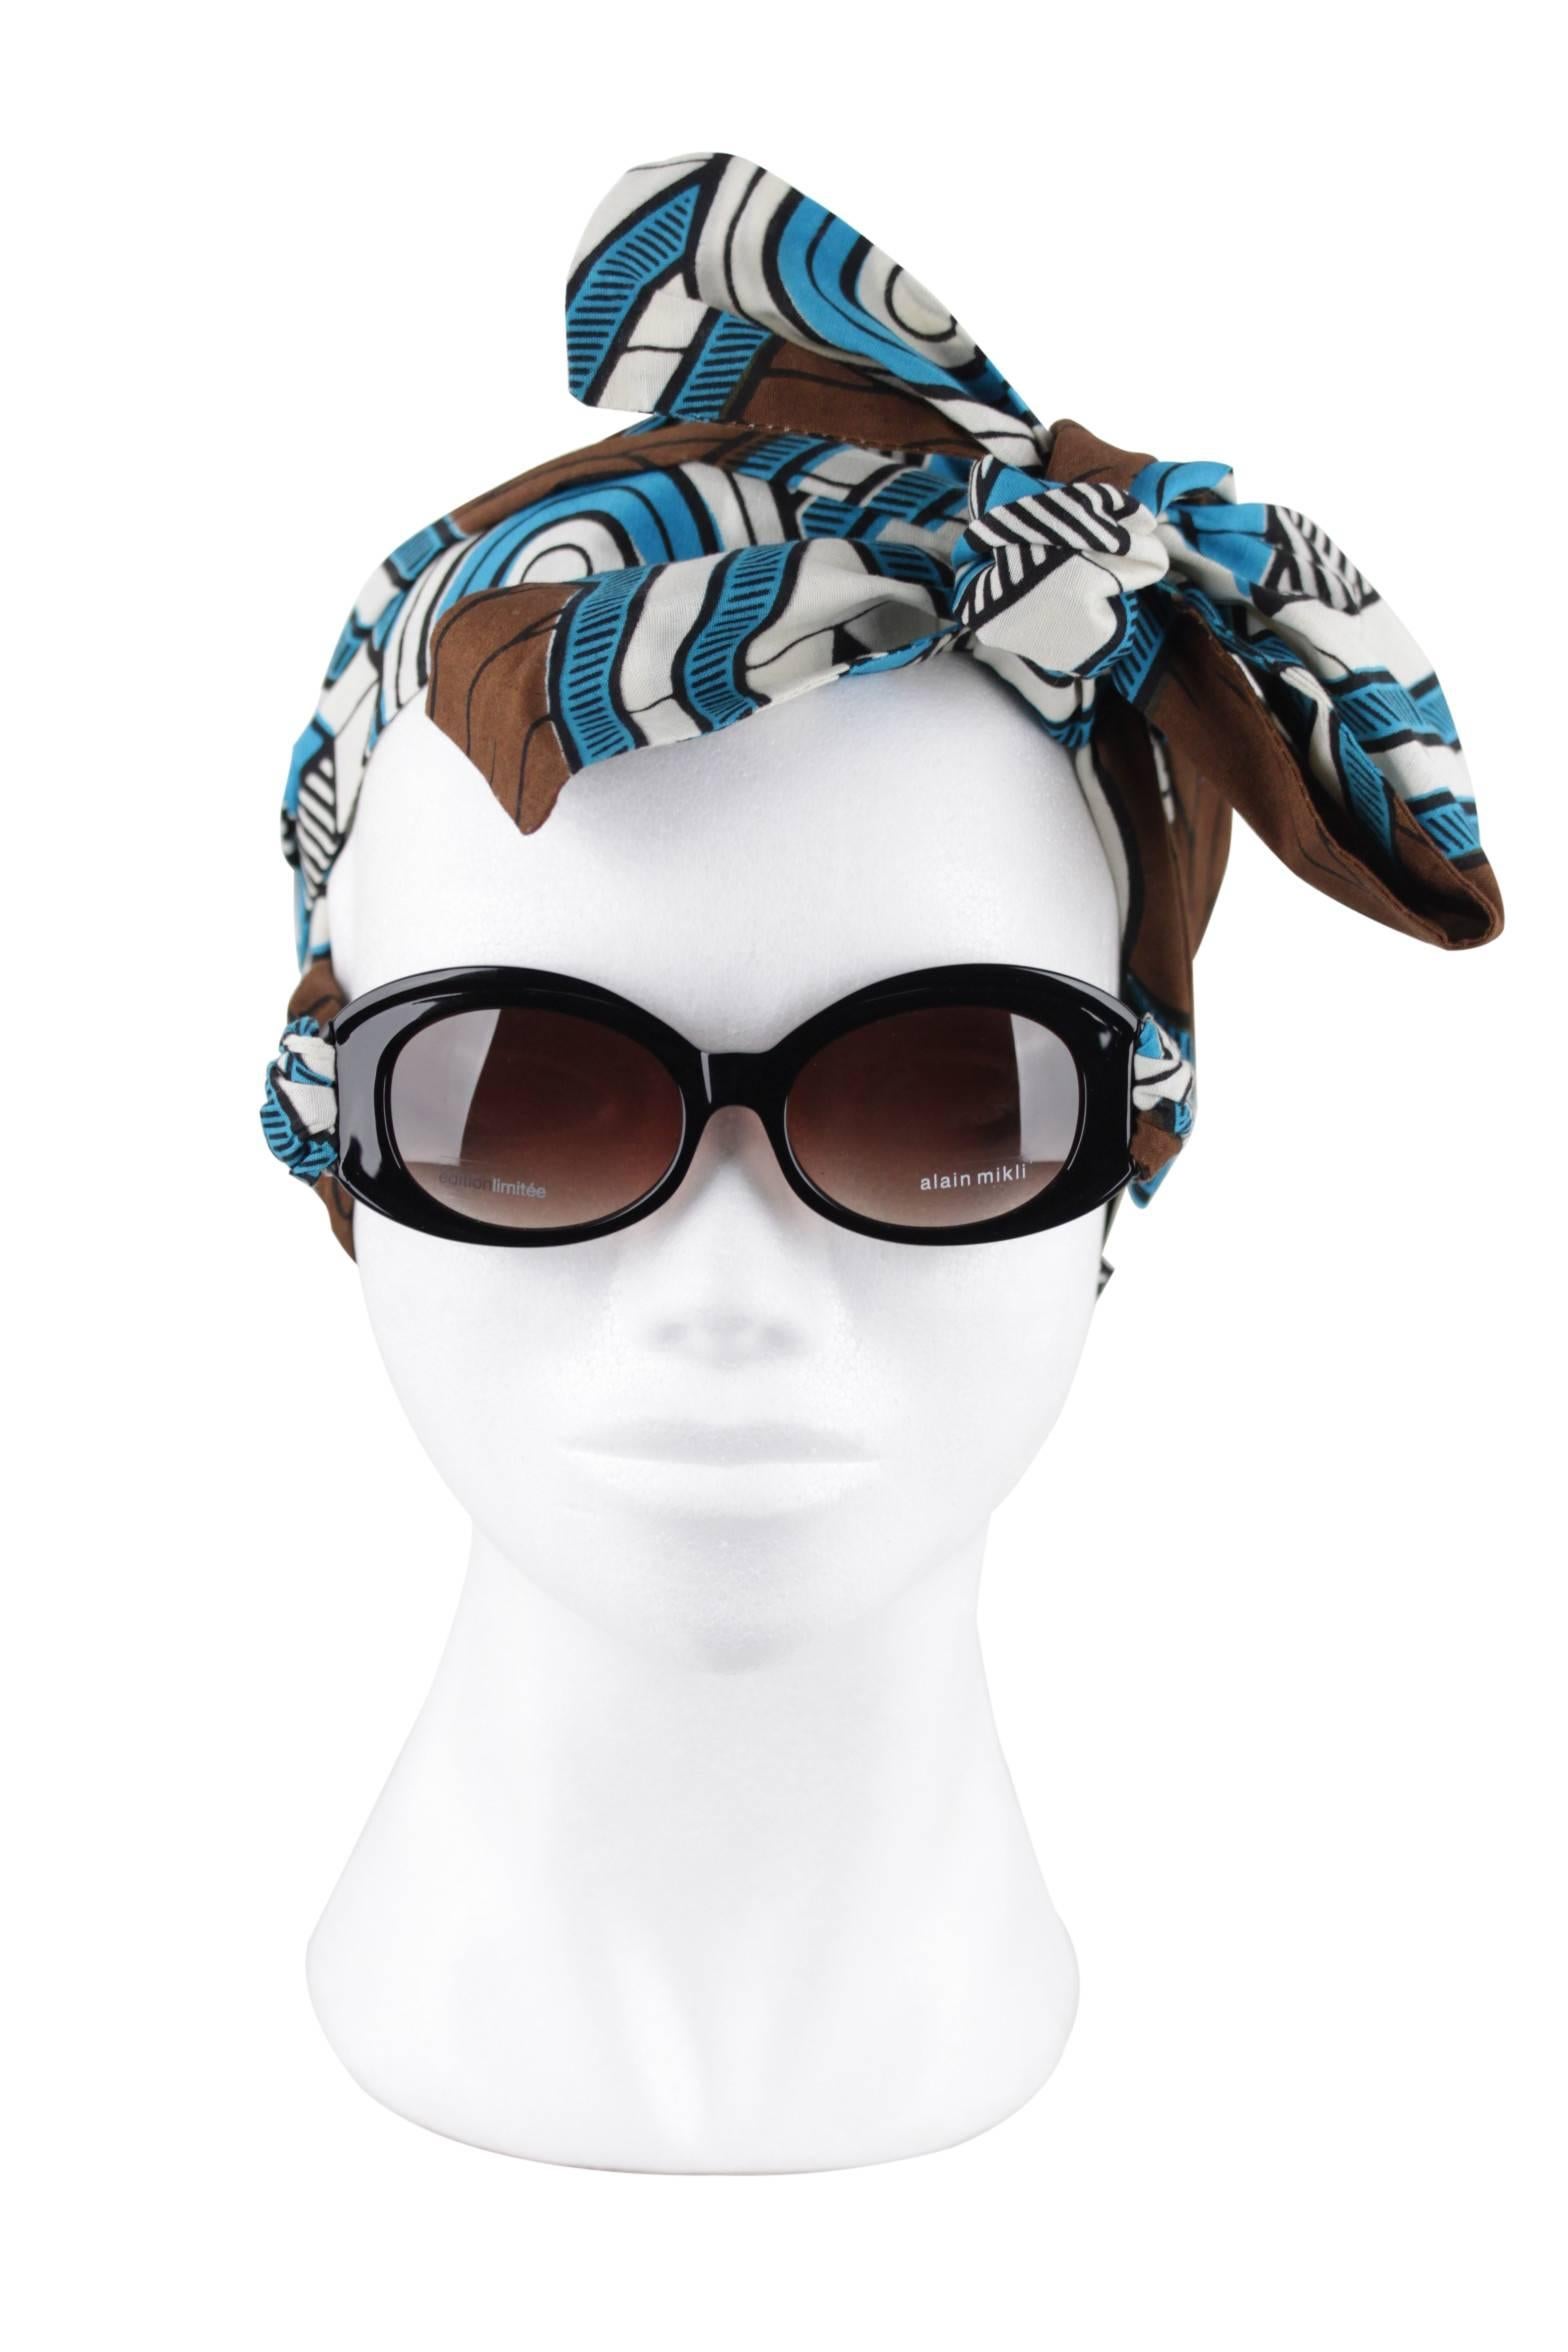 - Unique Alain Mikli 'Imany' A01425 sunglasses - Limited Edition Collection (030/090)
- Mod. A01425 101K - 52/17 - 140
- 'lunette-foulard': removable African wax print scarfs dresses up the temples of an oval shaped frame
- Full rim black oval